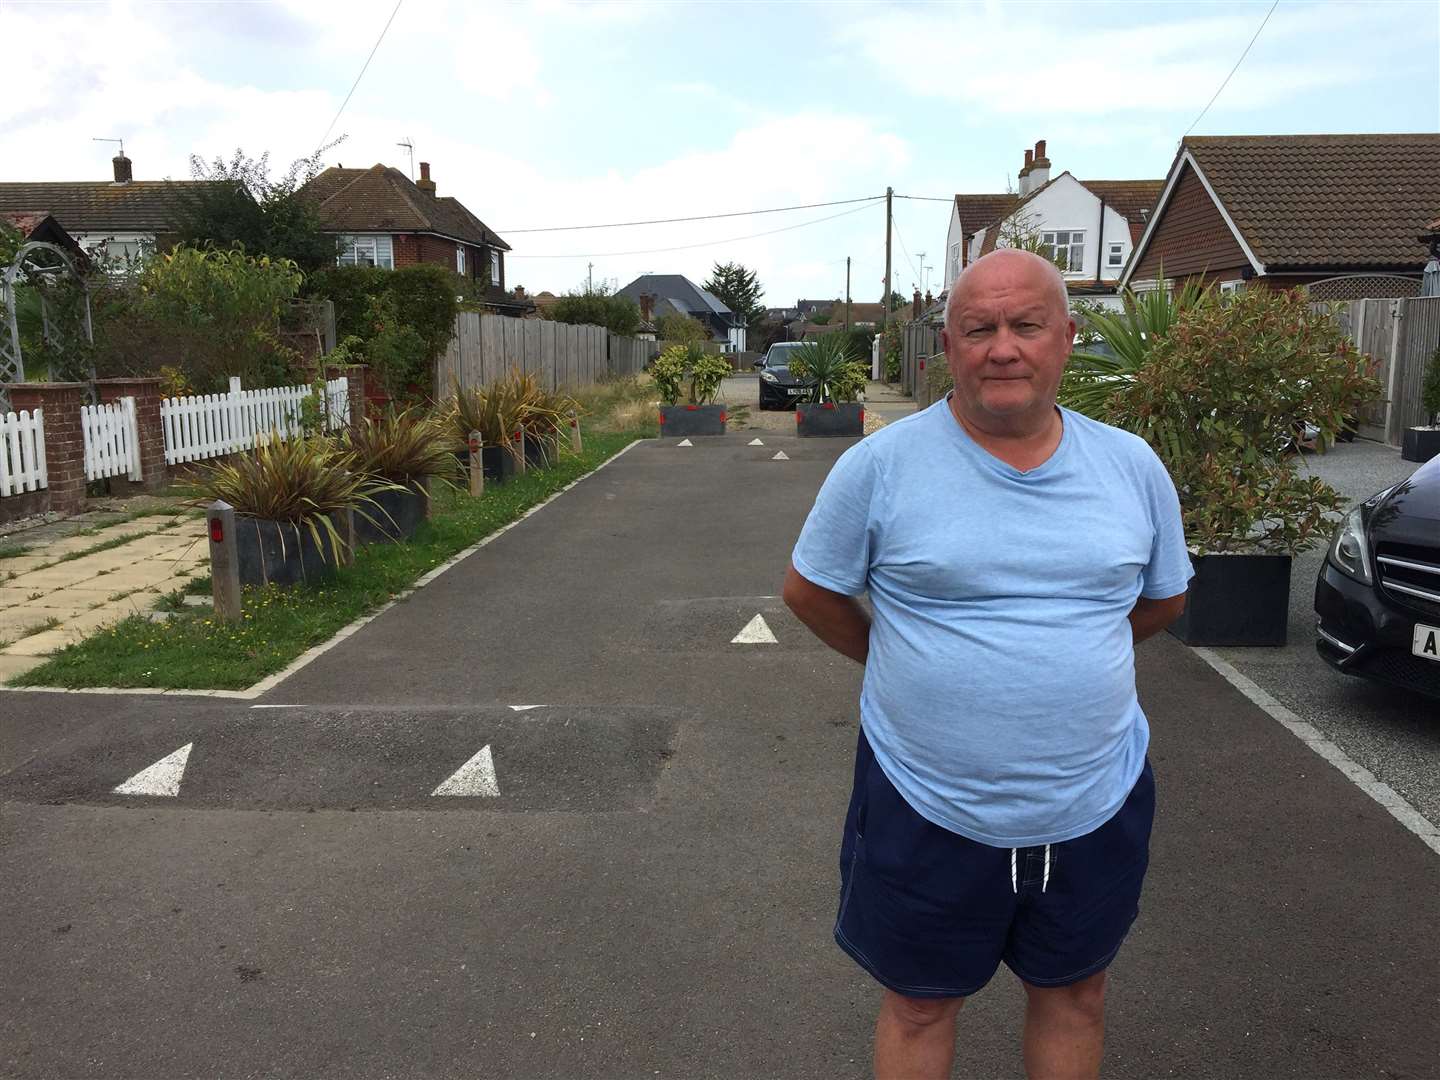 Adrian Kent's grandchildren became too scared to play outside and his neighbours were hit by stones flicked up by speeding cars on Northdown Road, which is an unmade street near Tankerton